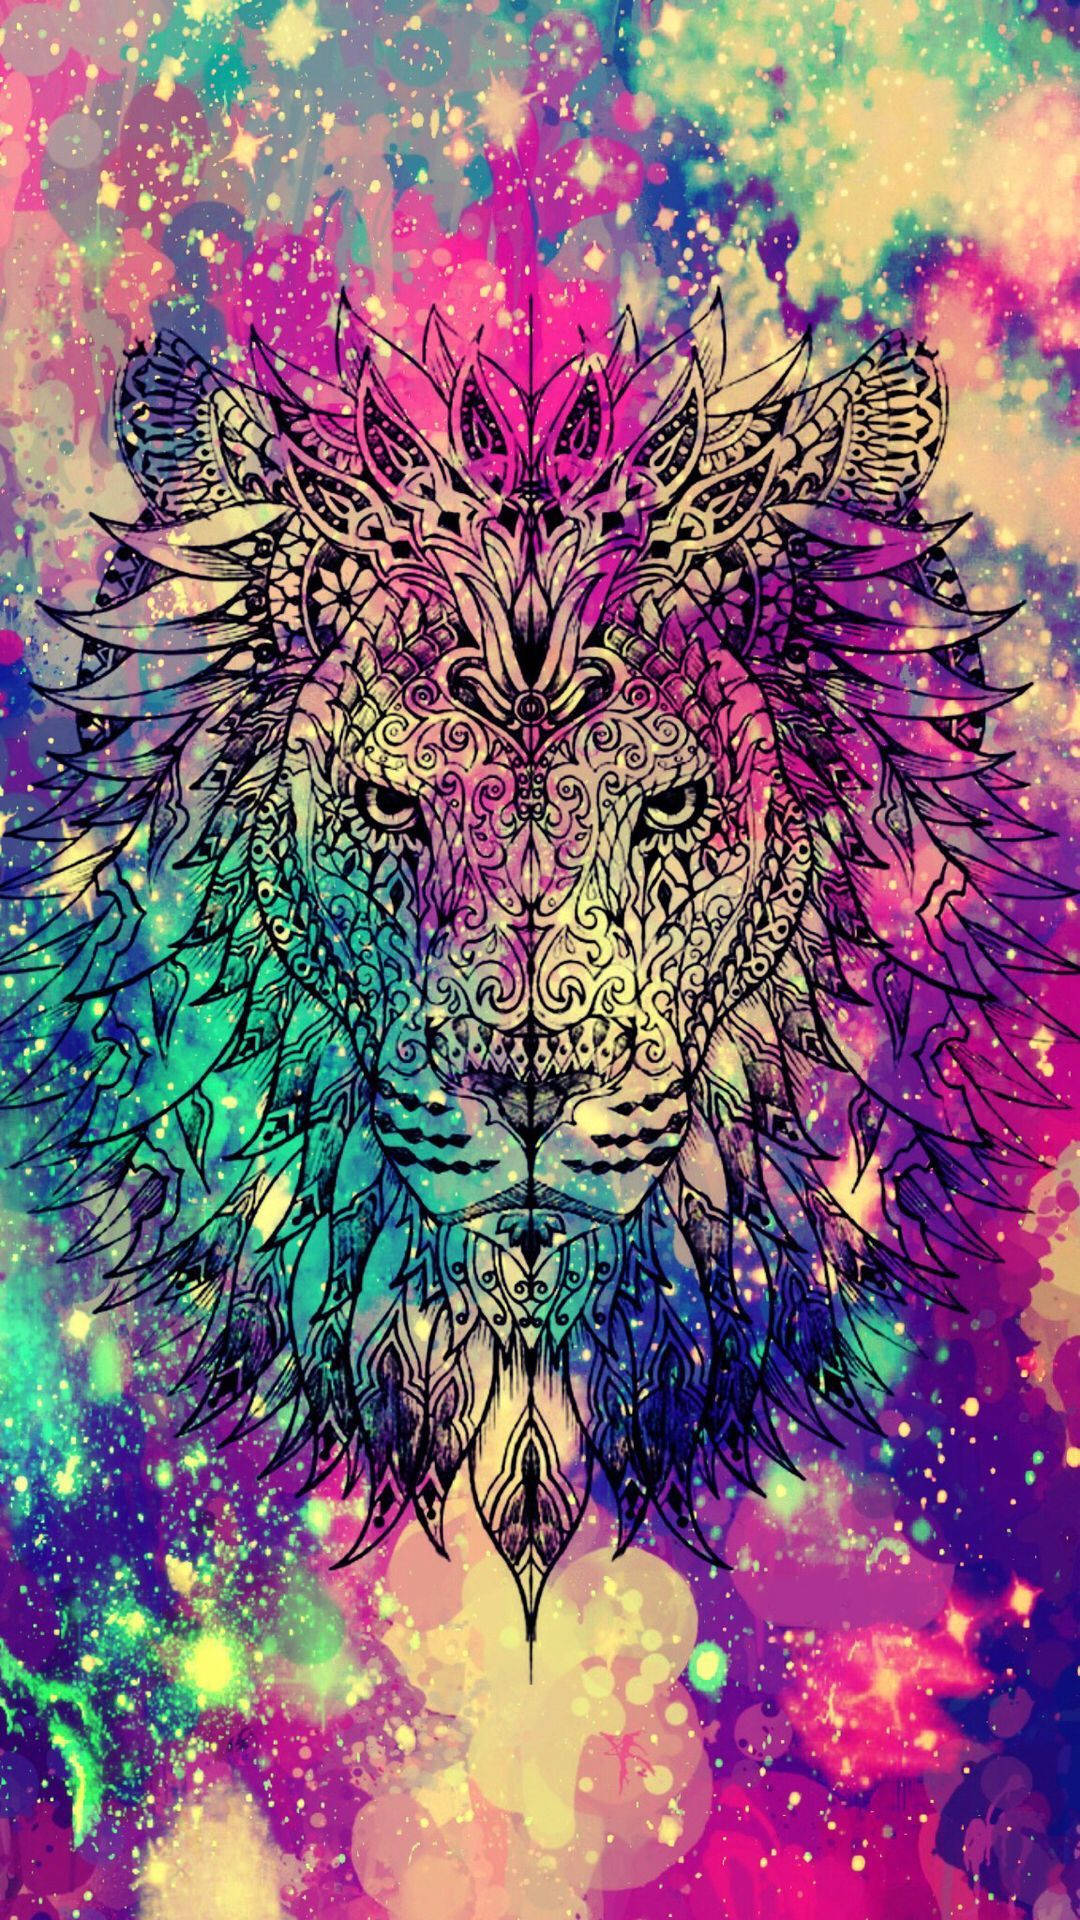 Abstract Galaxy Lion Wallpaper